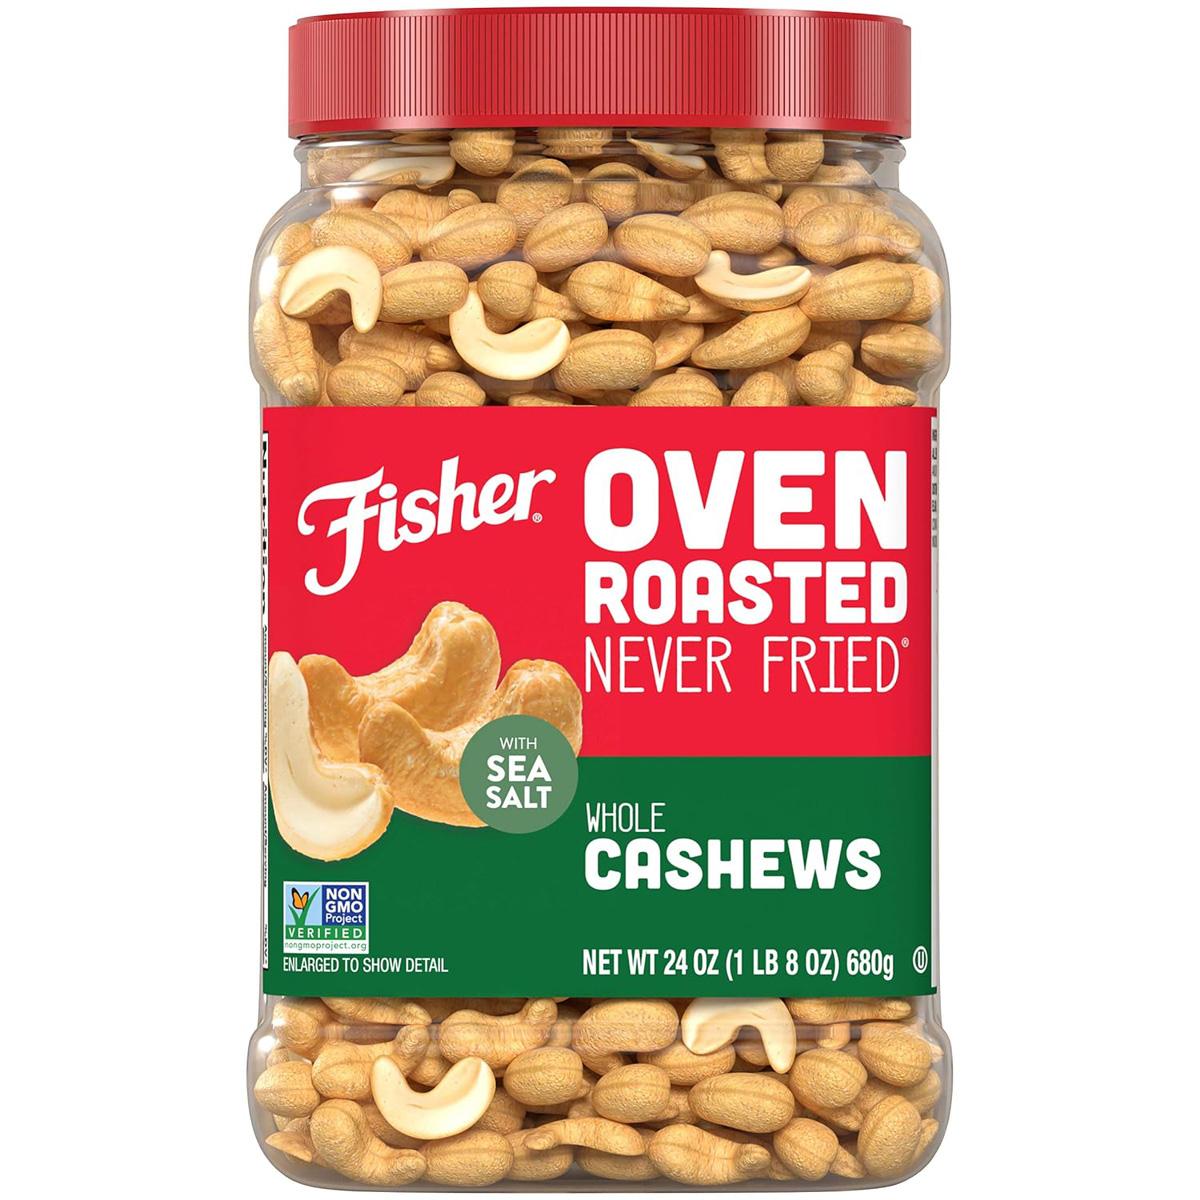 Fisher Snack Oven Roasted Never Fried Whole Cashews Nuts for $8.95